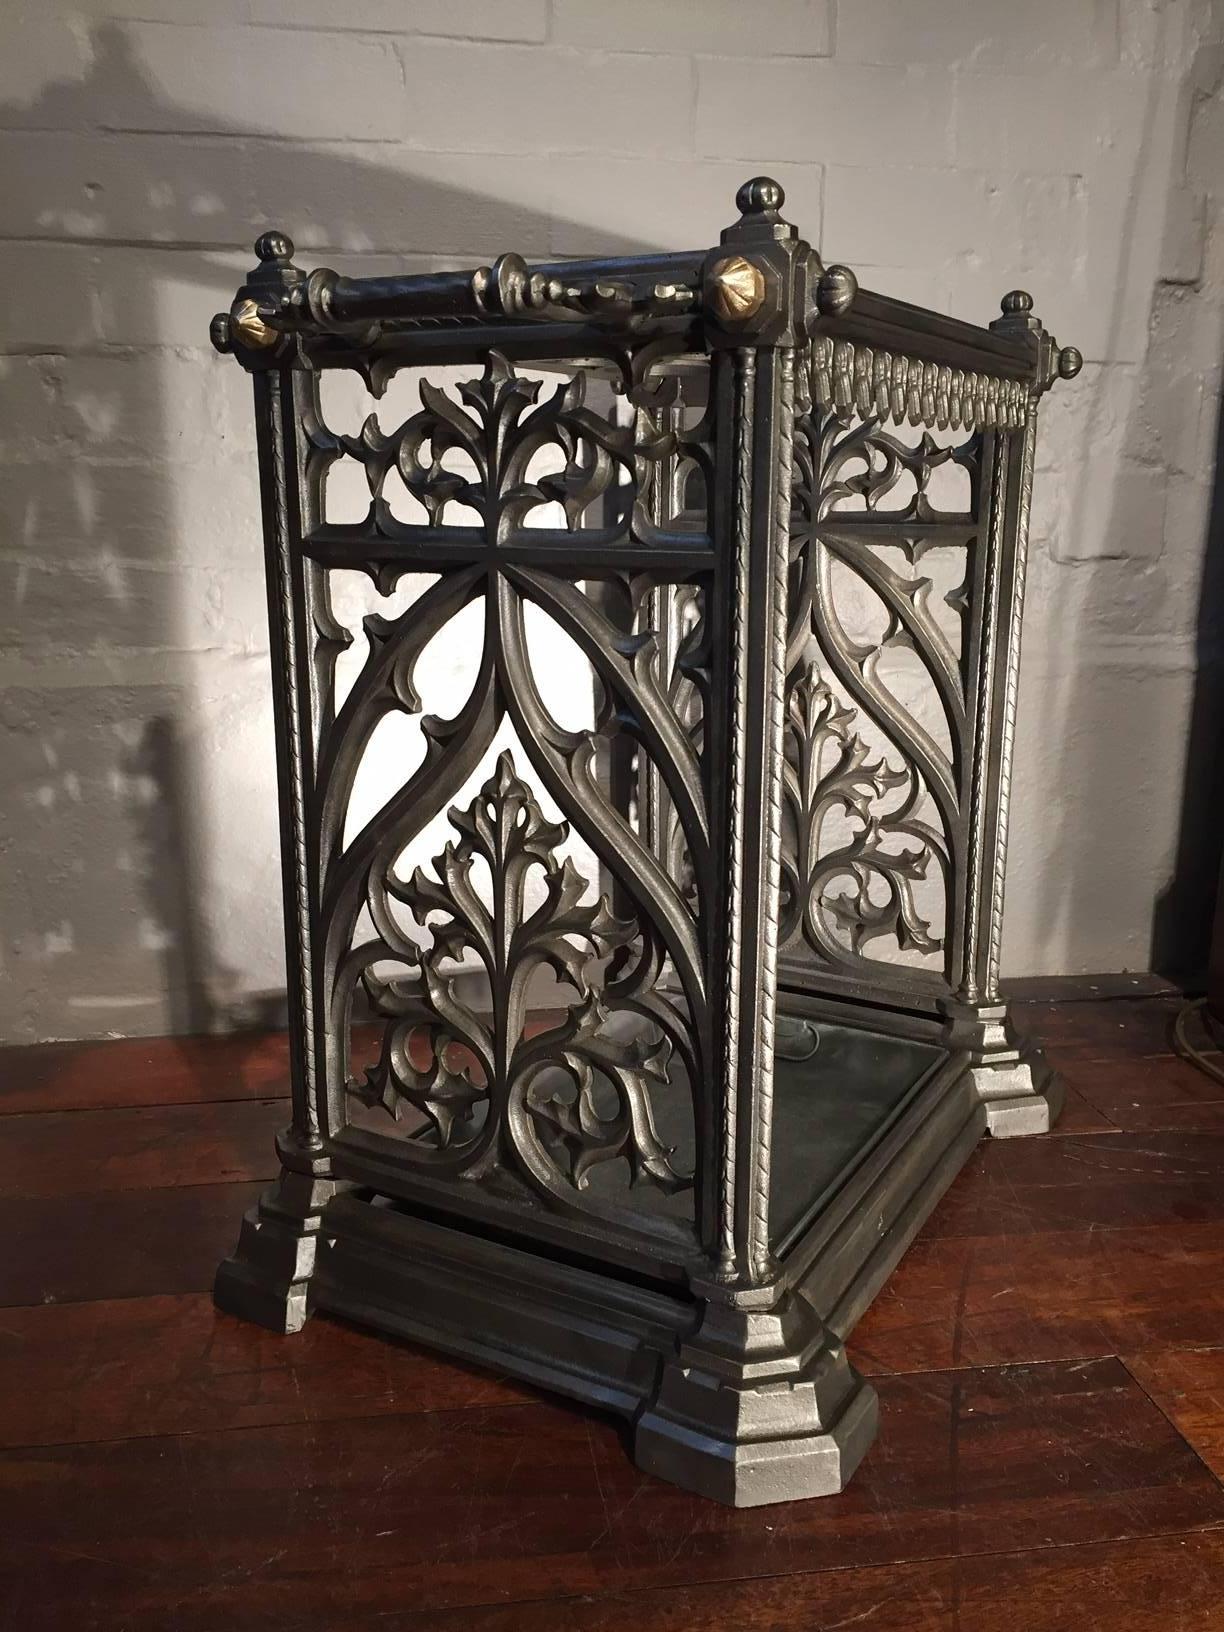 A decorative and most unusual Victorian cast iron umbrella and stick stand with 12 circular dividers and ornate pierced sides on a moulded base.